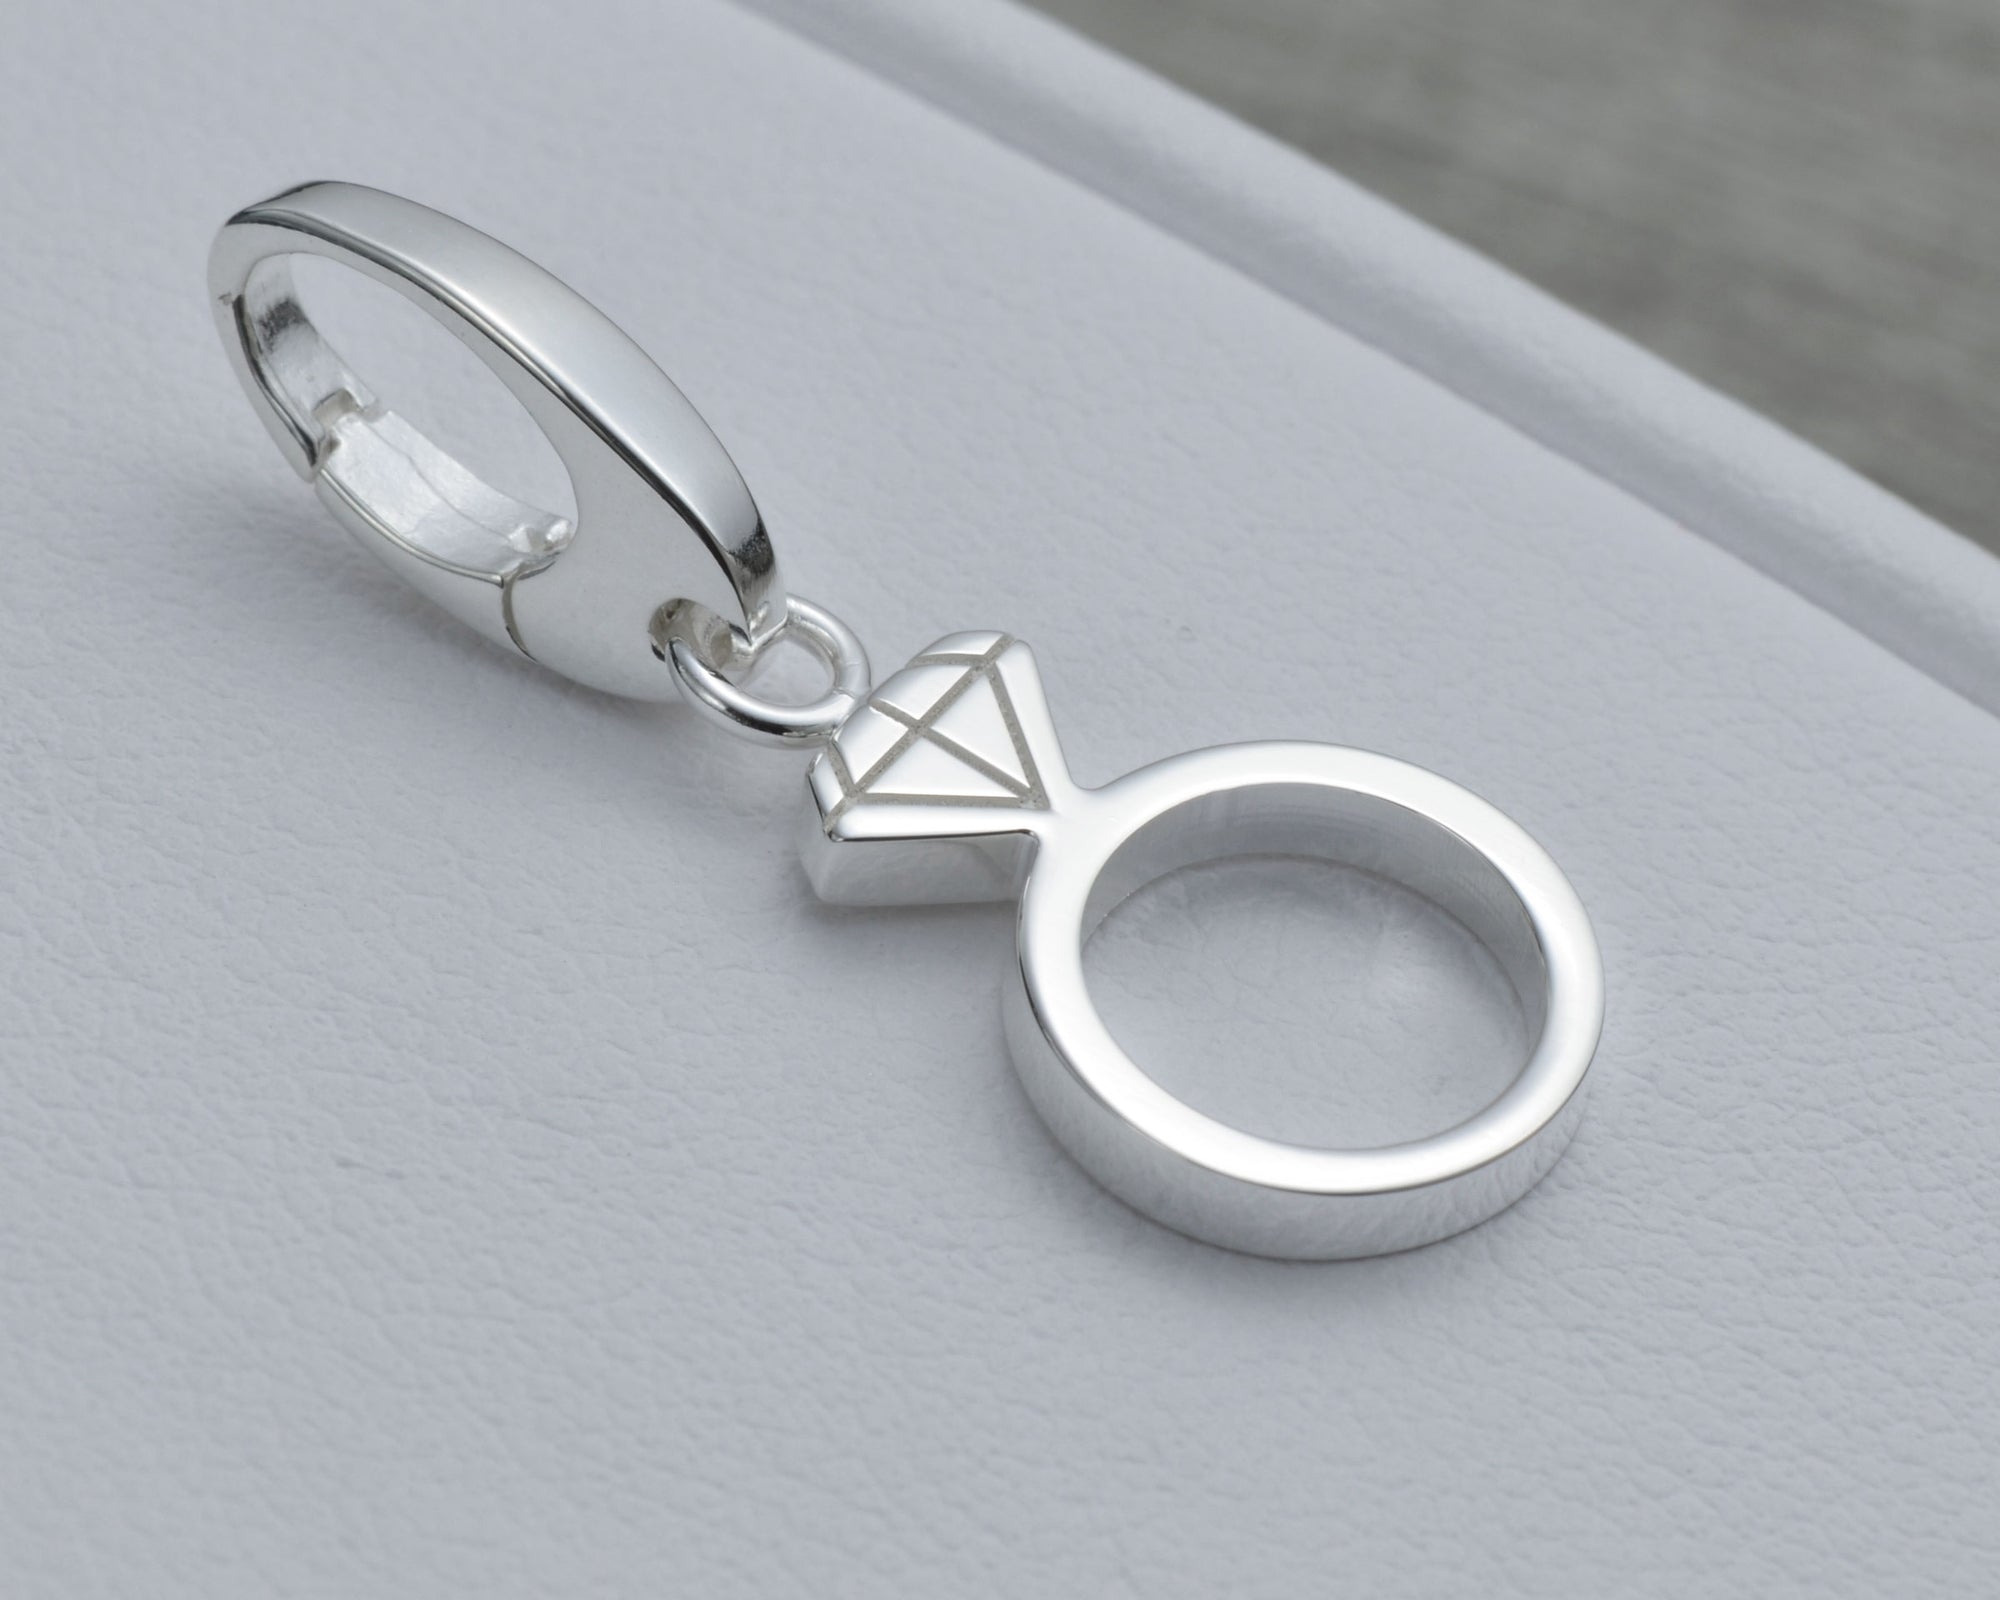 WEDDING RING CHARM IN STERLING SILVER